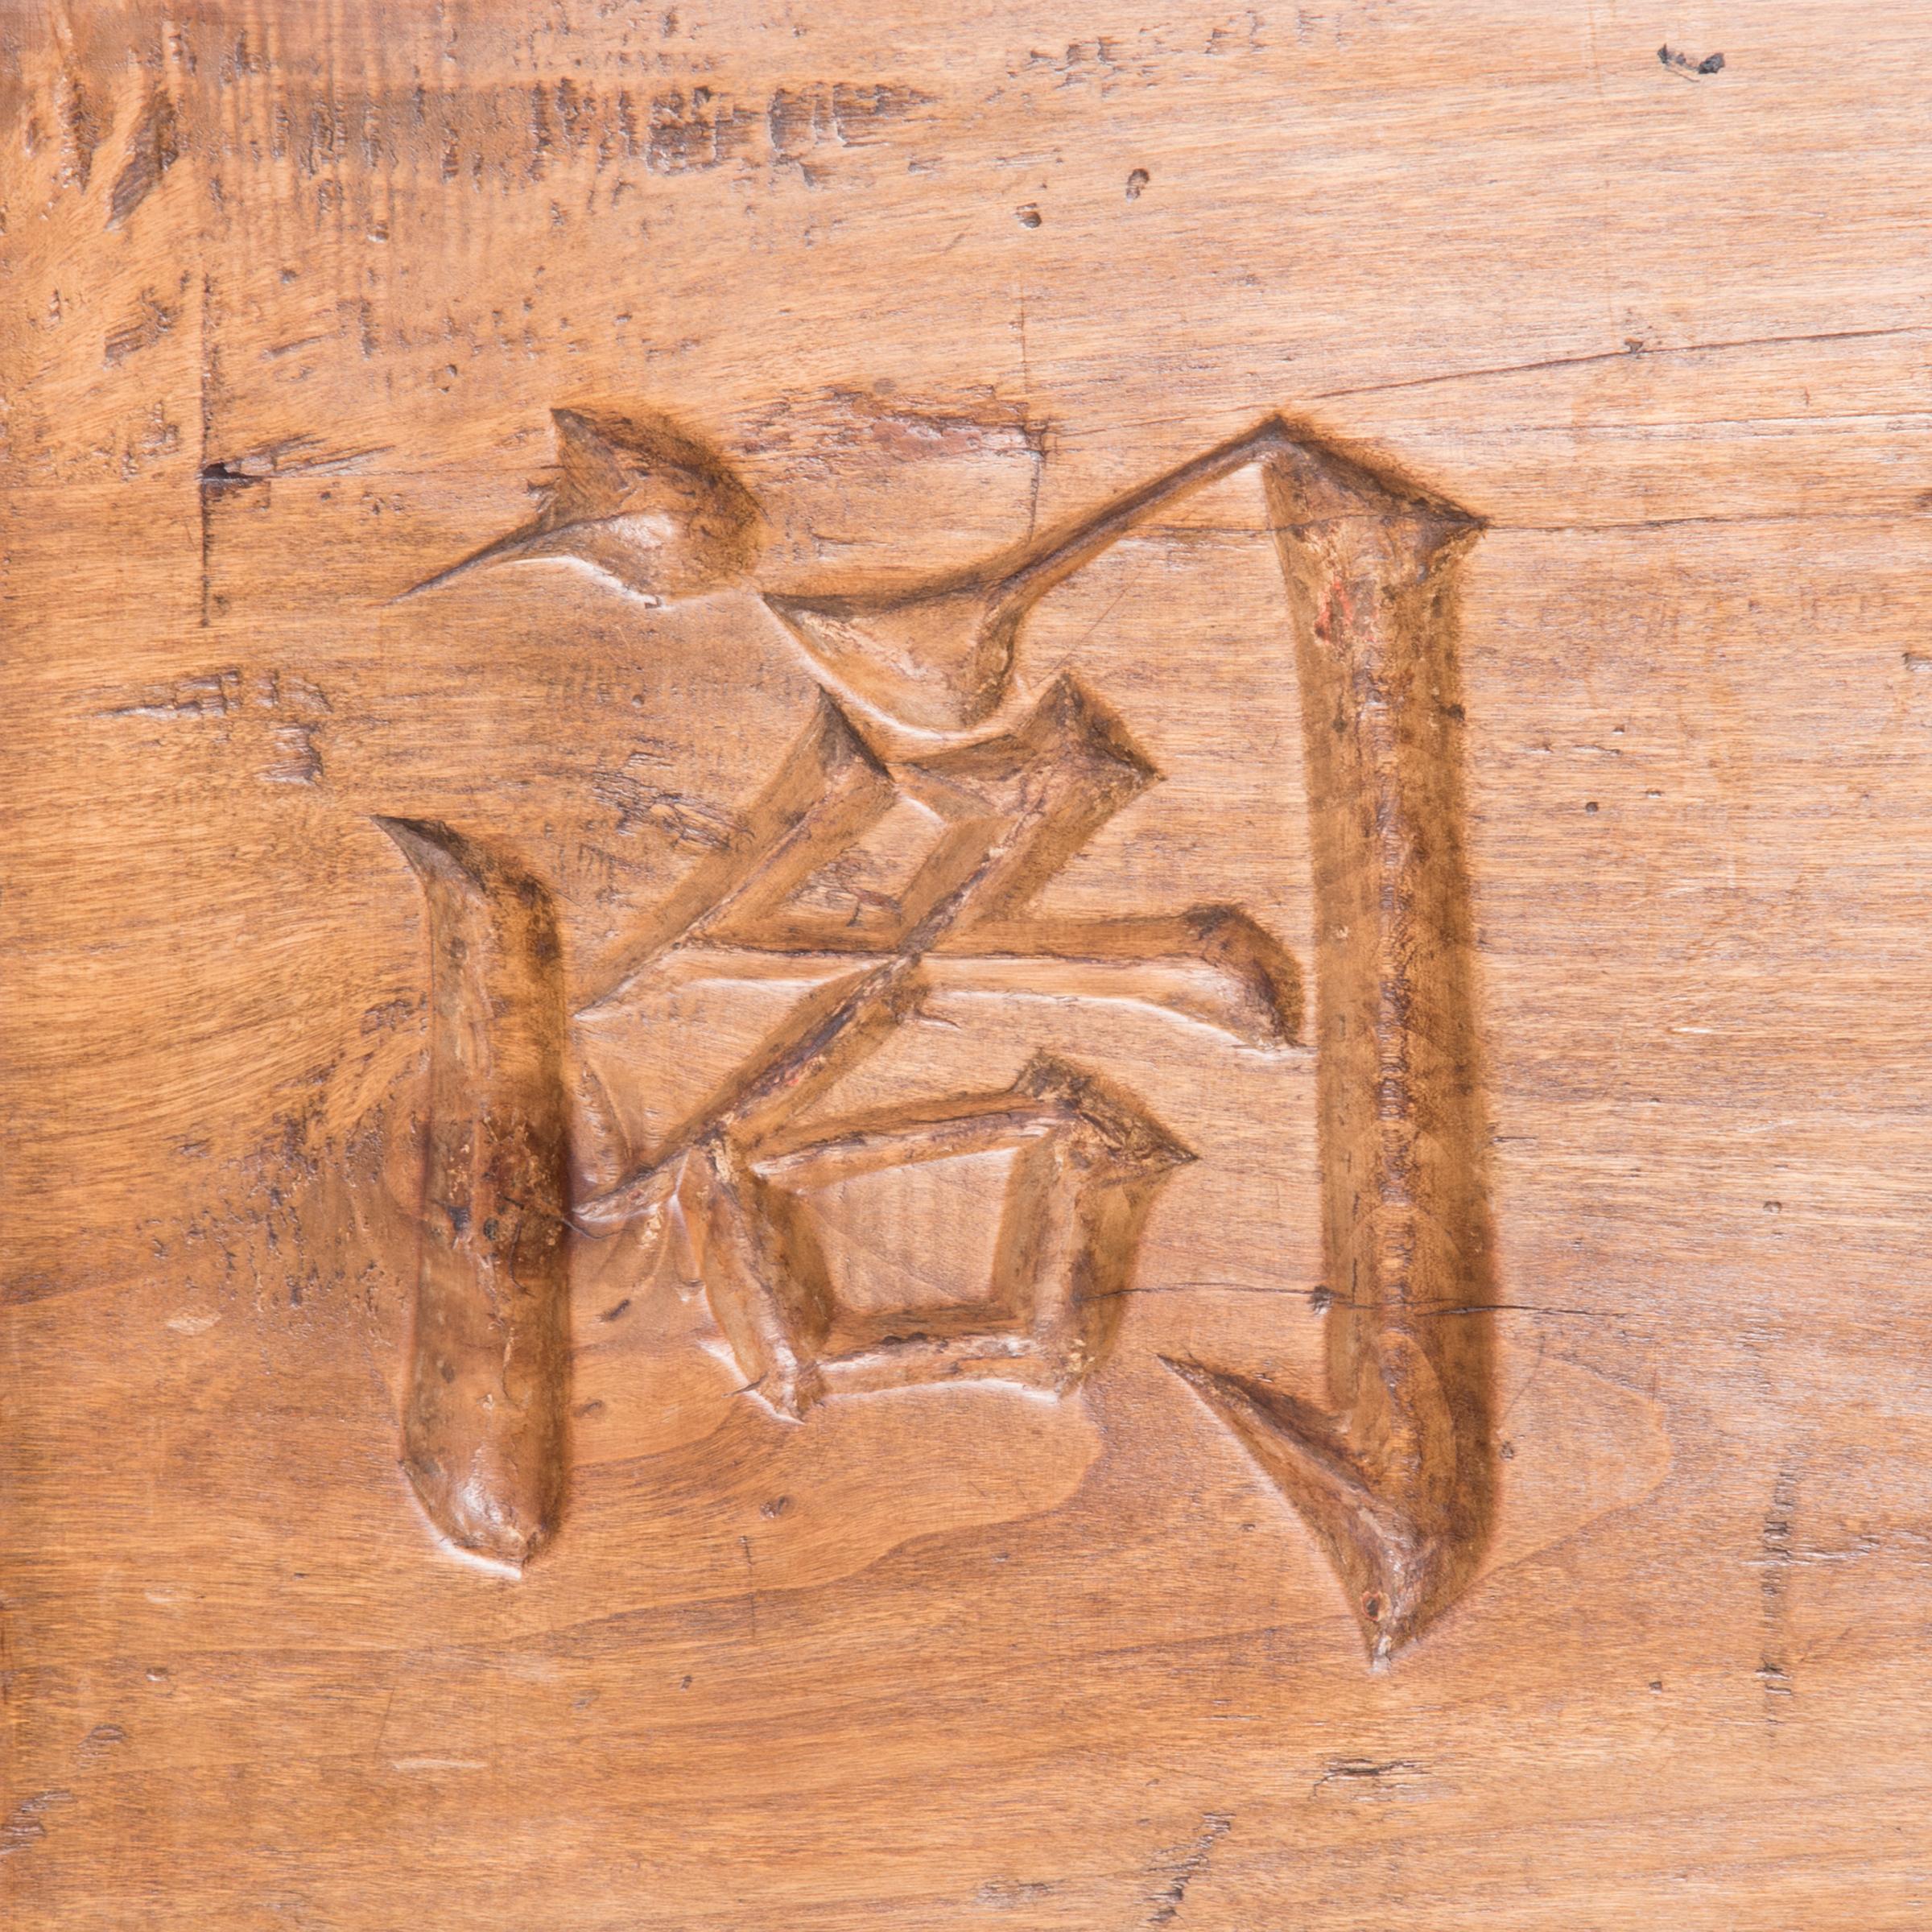 Characters carved in lyrical script on this beautifully-aged wood tablet literally translate to House, Phoenix and Mystical Bird. Bestowed to an individual respected in a Community, these words together would symbolically honor the person as well